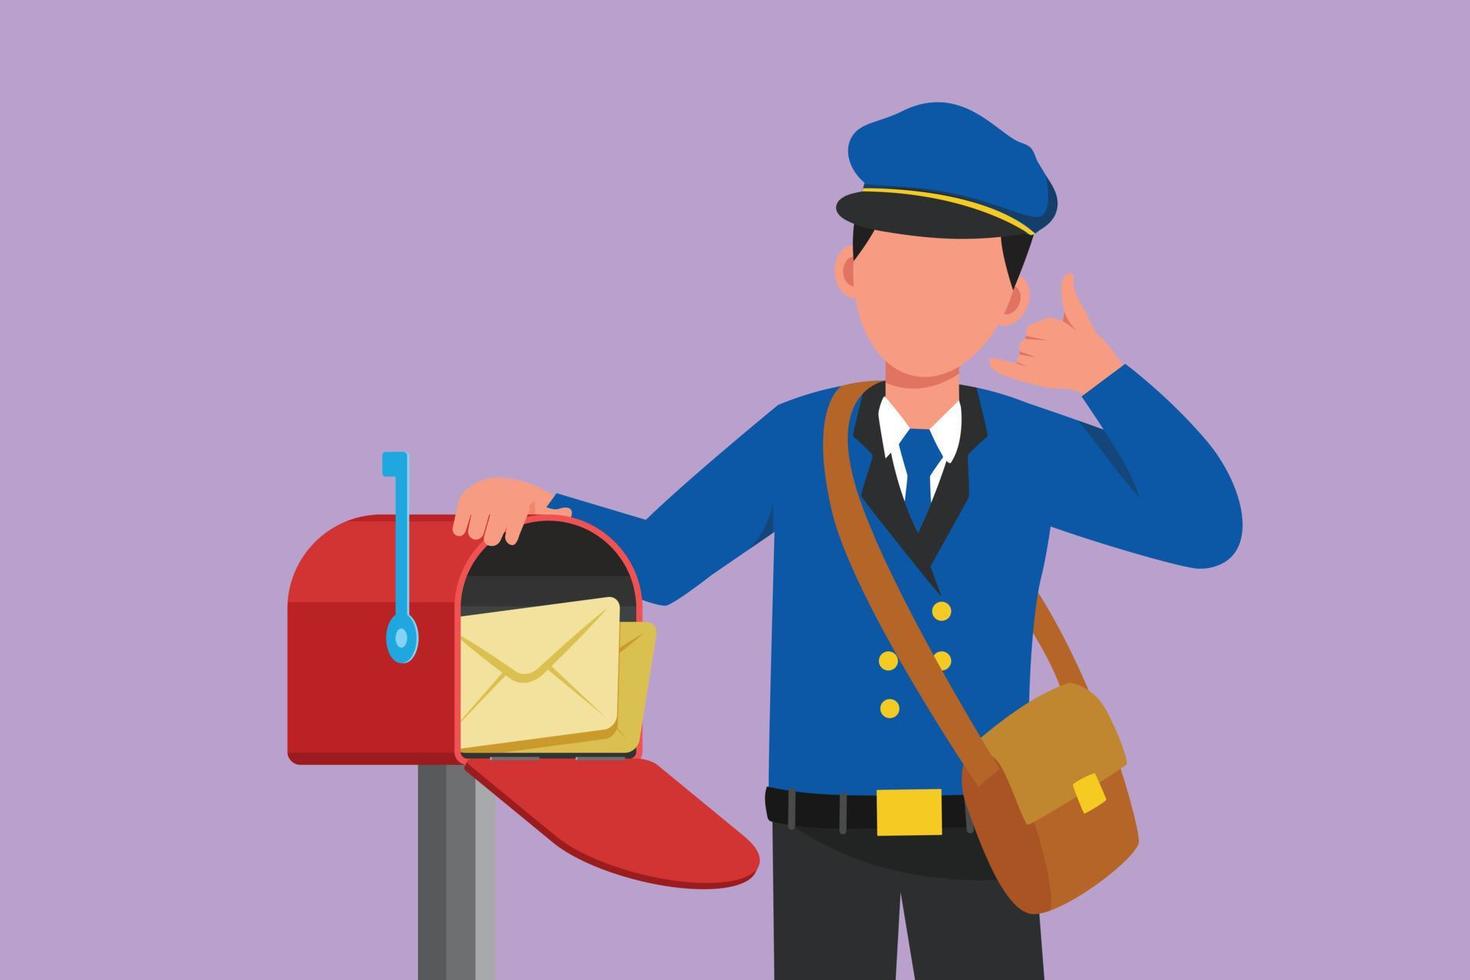 Graphic flat design drawing active postman holding envelope on mail box with call me gesture, wear hat, bag, uniform, working hard to delivery mail to home address. Cartoon style vector illustration